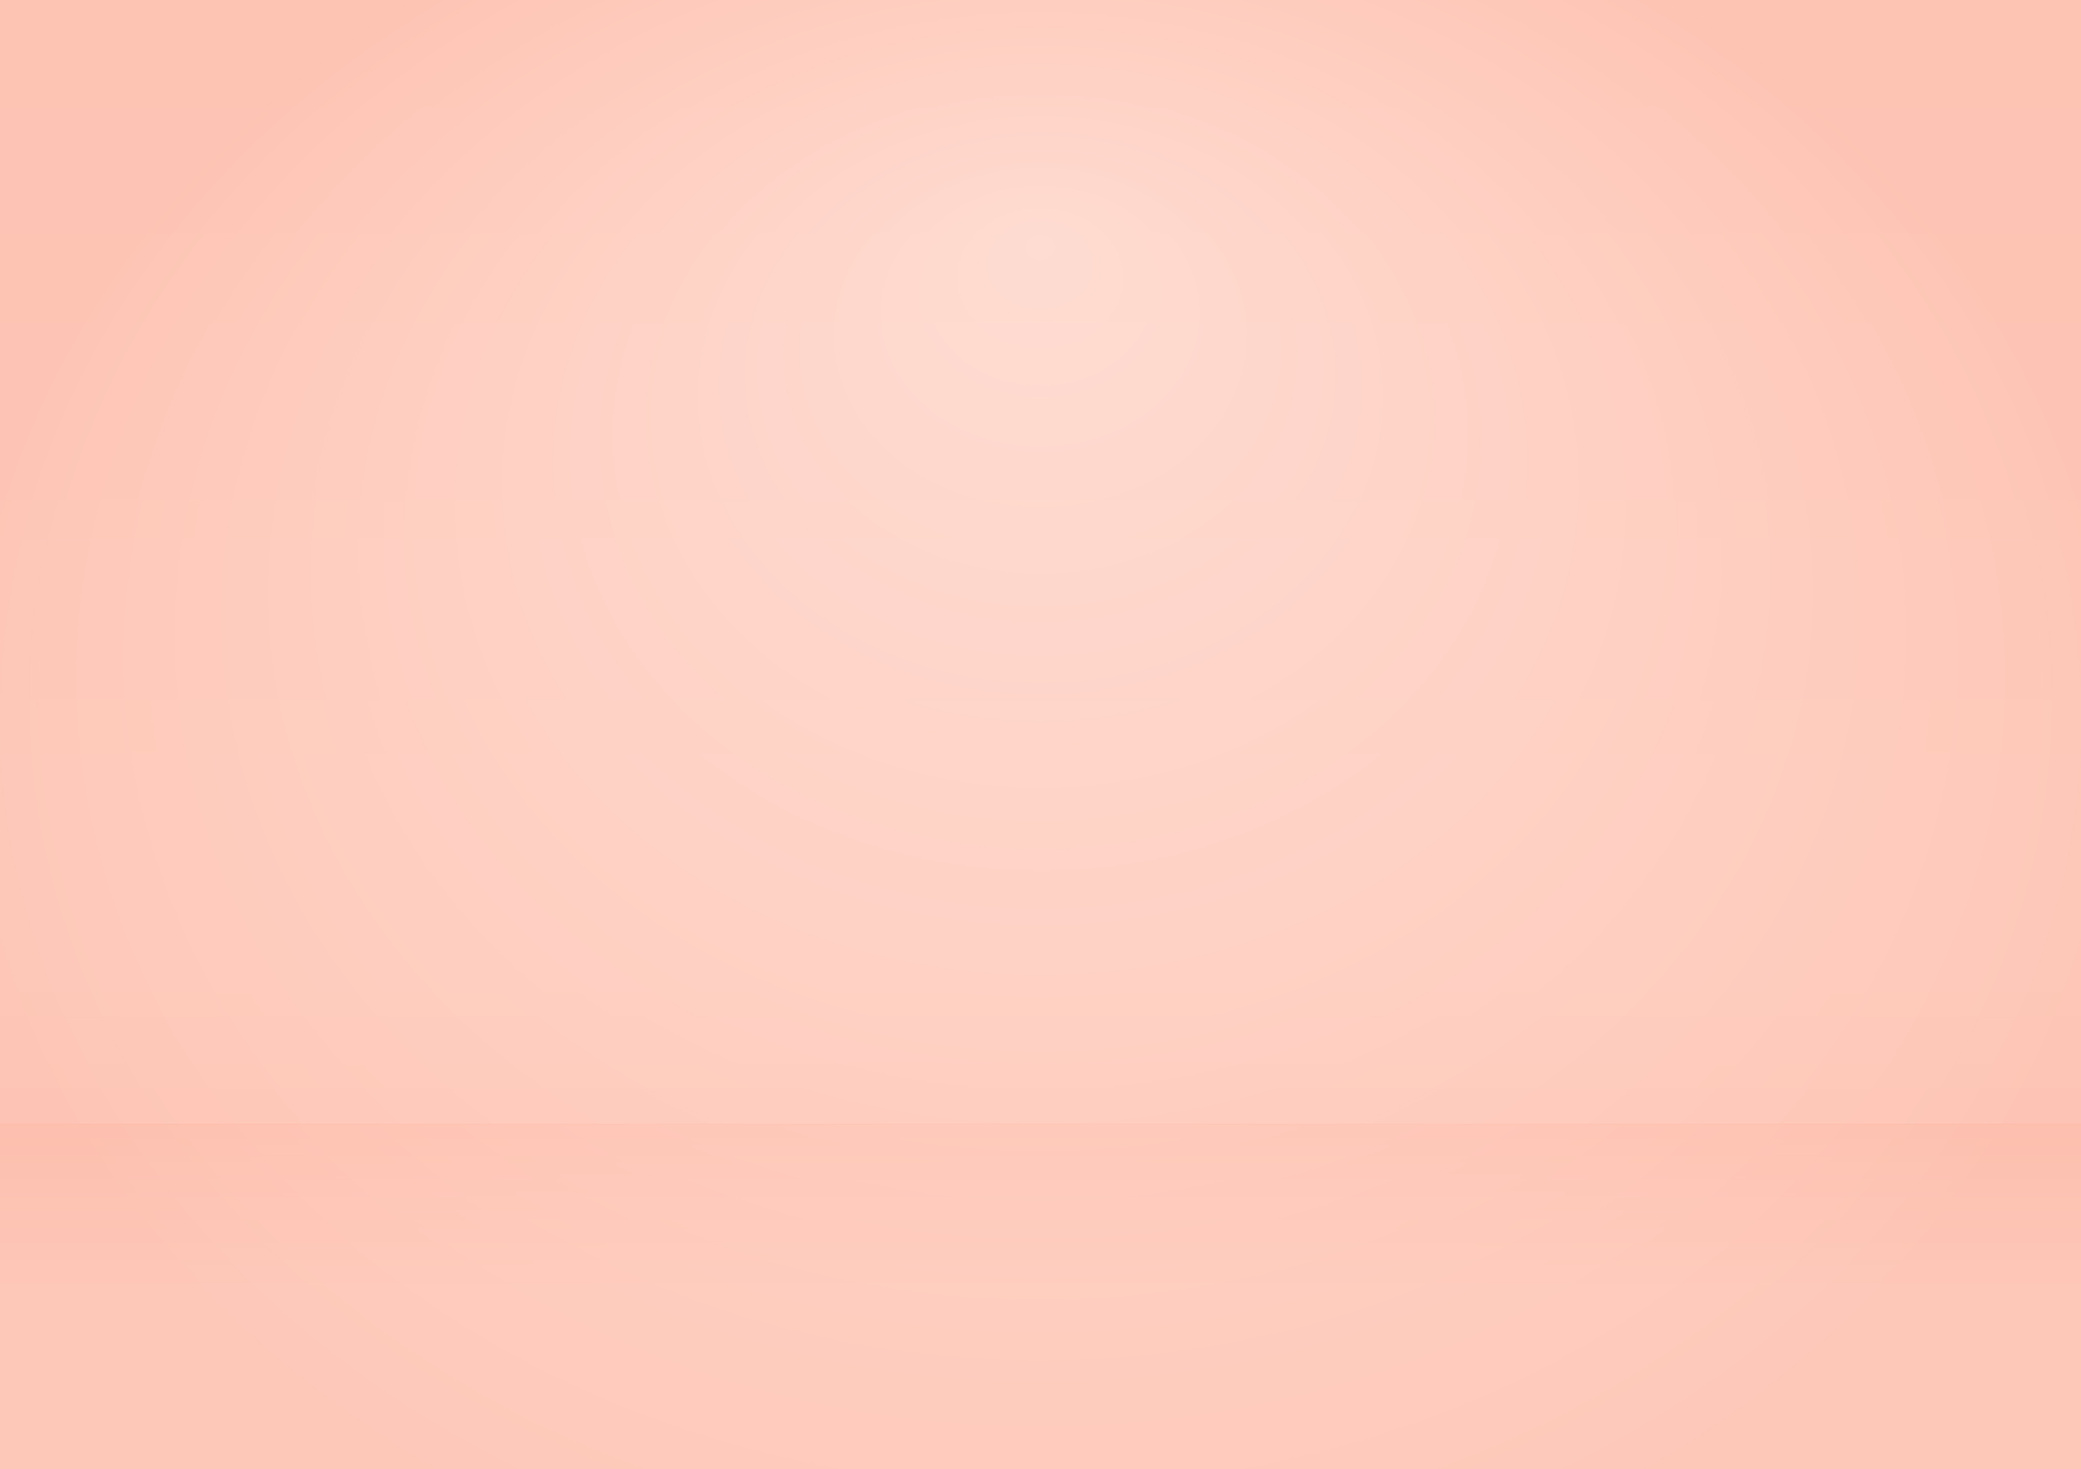 Empty room background peach color